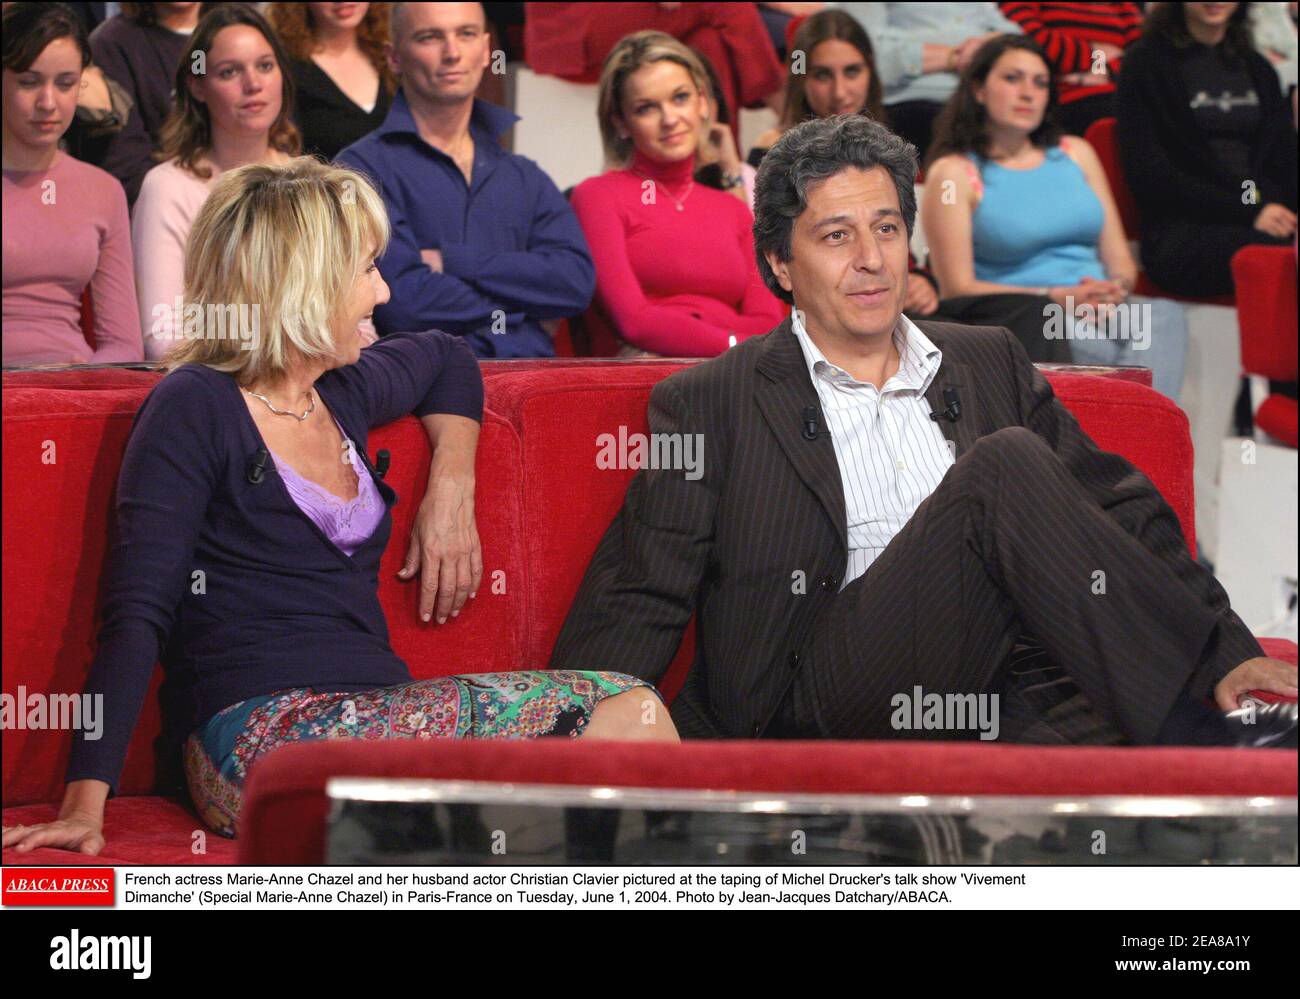 French actress Marie-Anne Chazel and her husband actor Christian Clavier  pictured at the taping of Michel Drucker's talk show 'Vivement Dimanche'  (Special Marie-Anne Chazel) in Paris-France on Tuesday, June 1, 2004. Photo